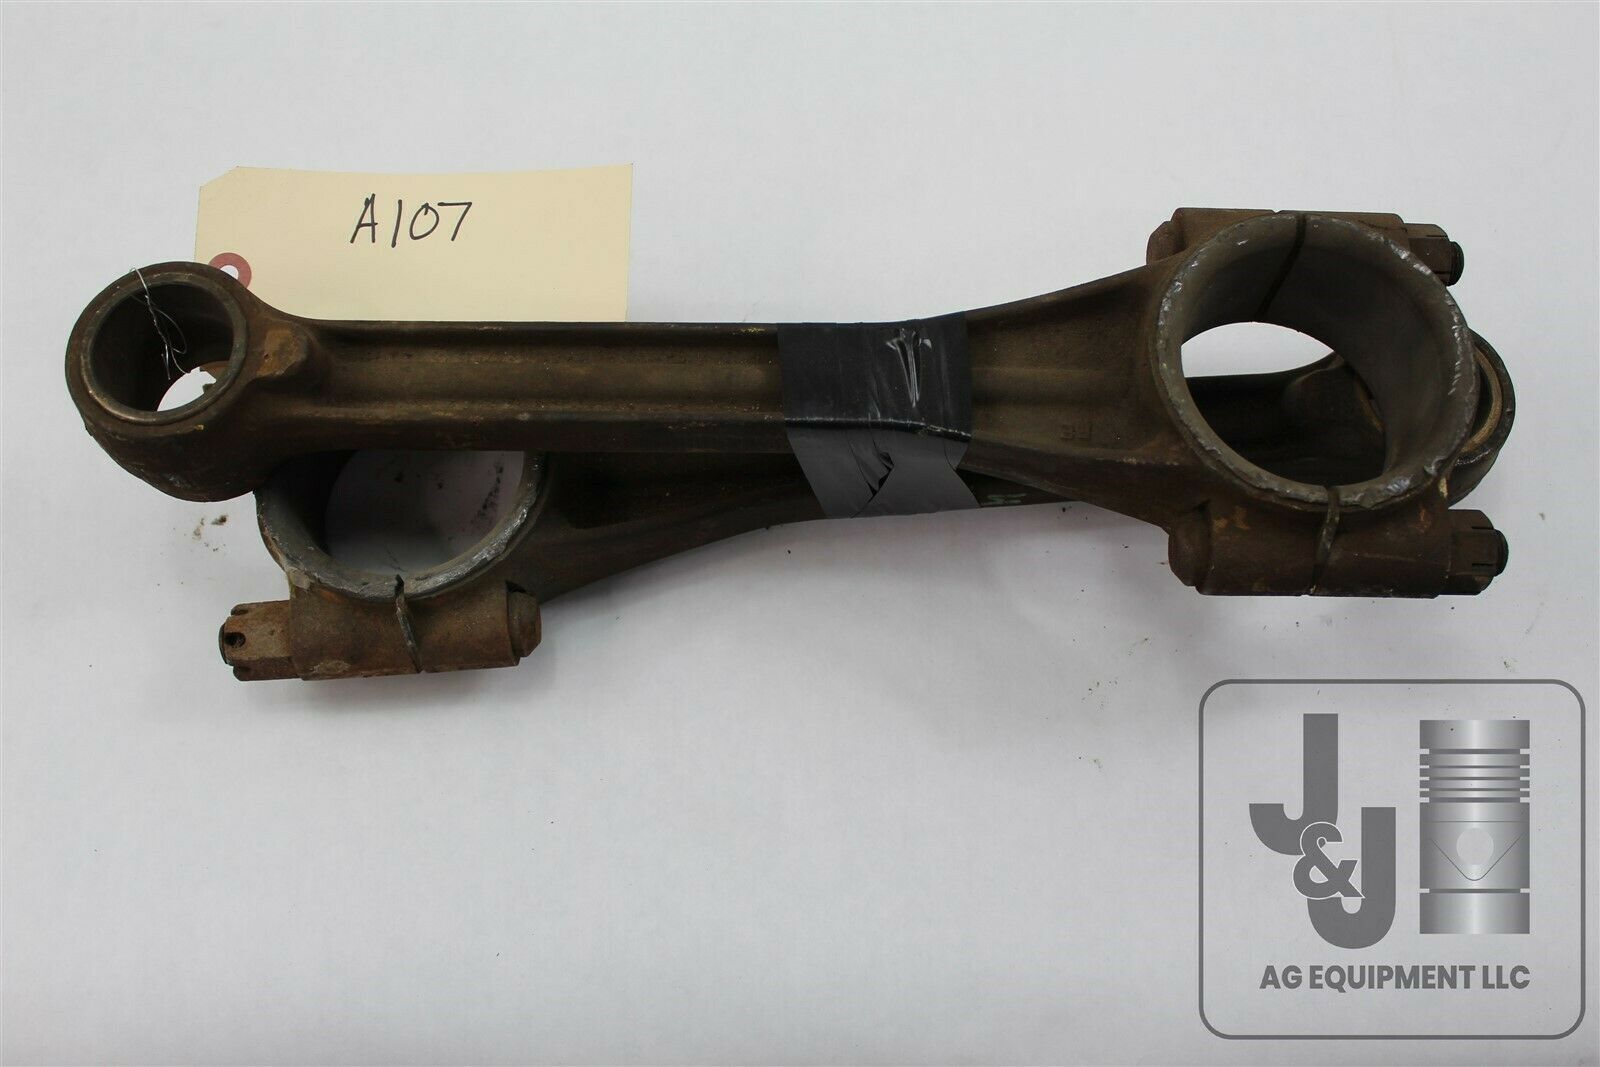 USED PAIR of JOHN DEERE A107R CONNECTING RODS A AR AO